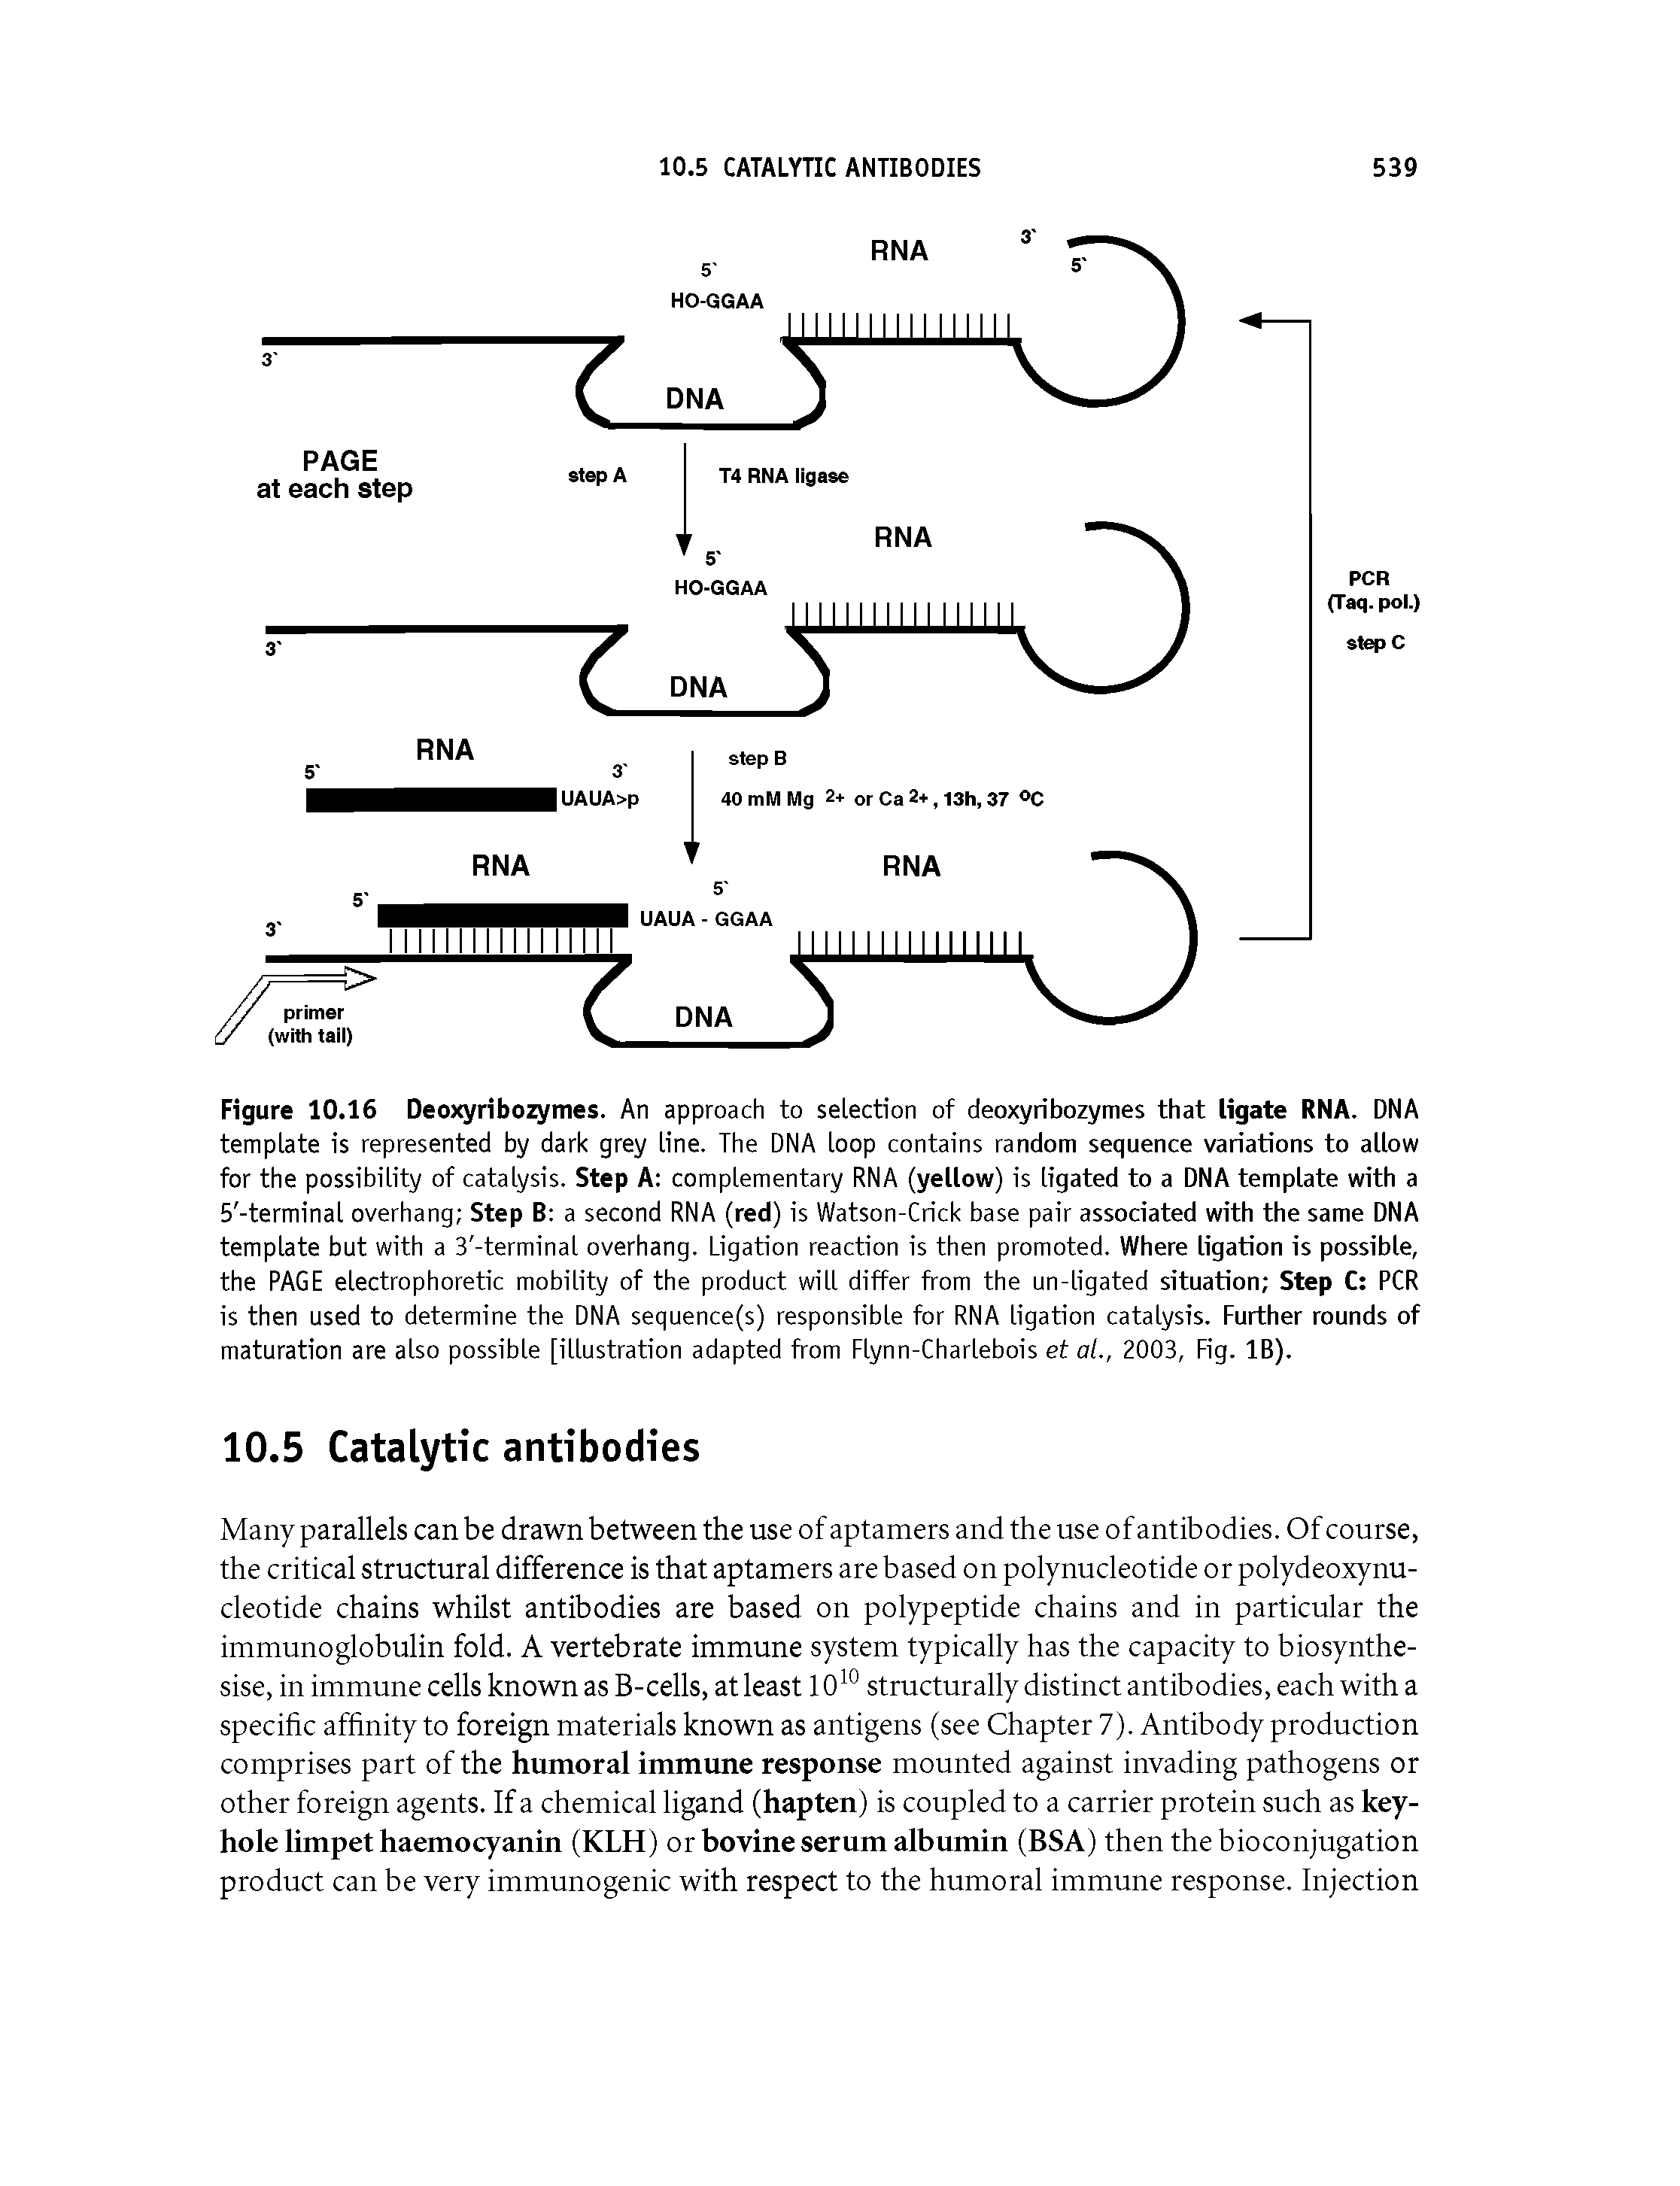 Figure 10.16 Deoxyribozymes. An approach to selection of deoxyribozymes that ligate RNA. DNA template is represented by dark grey line. The DNA loop contains random sequence variations to allow for the possibility of catalysis. Step A complementary RNA (yellow) is ligated to a DNA template with a 5 -terminal overhang Step B a second RNA (red) is Watson-Crick base pair associated with the same DNA template but with a 3 -terminal overhang. Ligation reaction is then promoted. Where ligation is possible, the PAGE electrophoretic mobility of the product will differ from the un-ligated situation Step C PCR is then used to determine the DNA sequence(s) responsible for RNA ligation catalysis. Further rounds of maturation are also possible [illustration adapted from Flynn-Charlebois et al., 2003, Fig. IB).